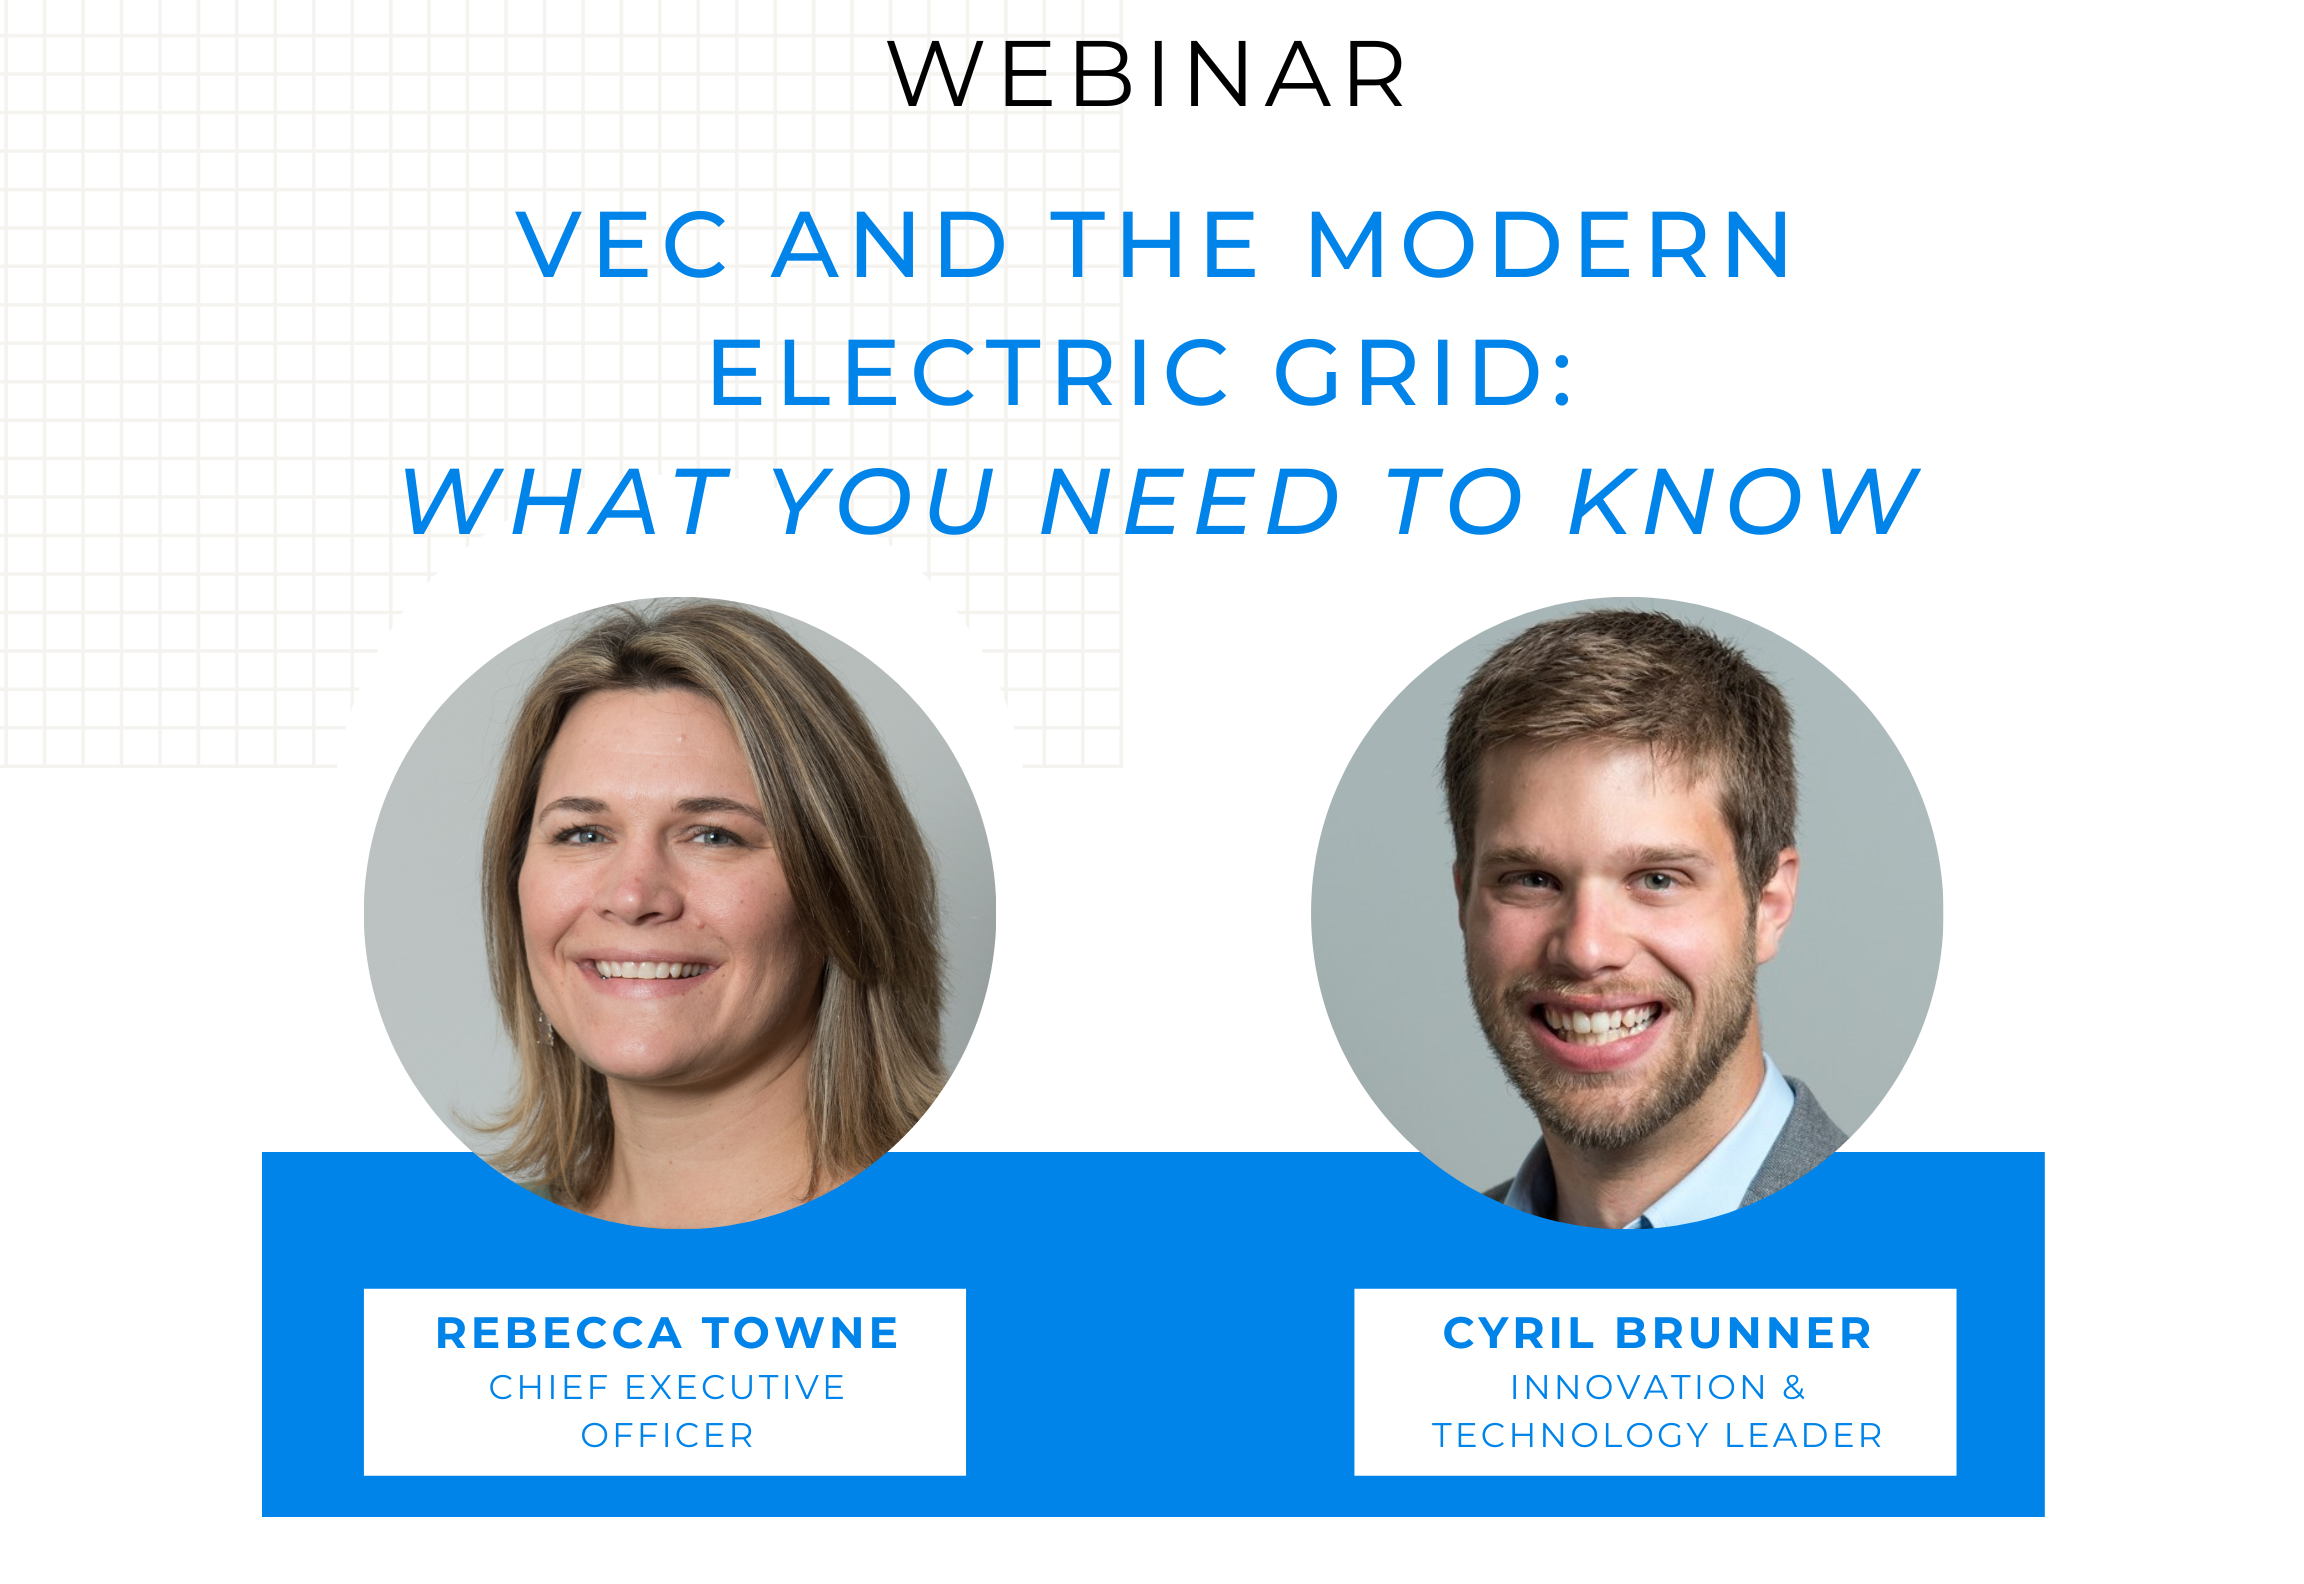 VEC Webinar: An Info-Packed Hour on Reliability, Clean Energy, EVs, Cybersecurity and More